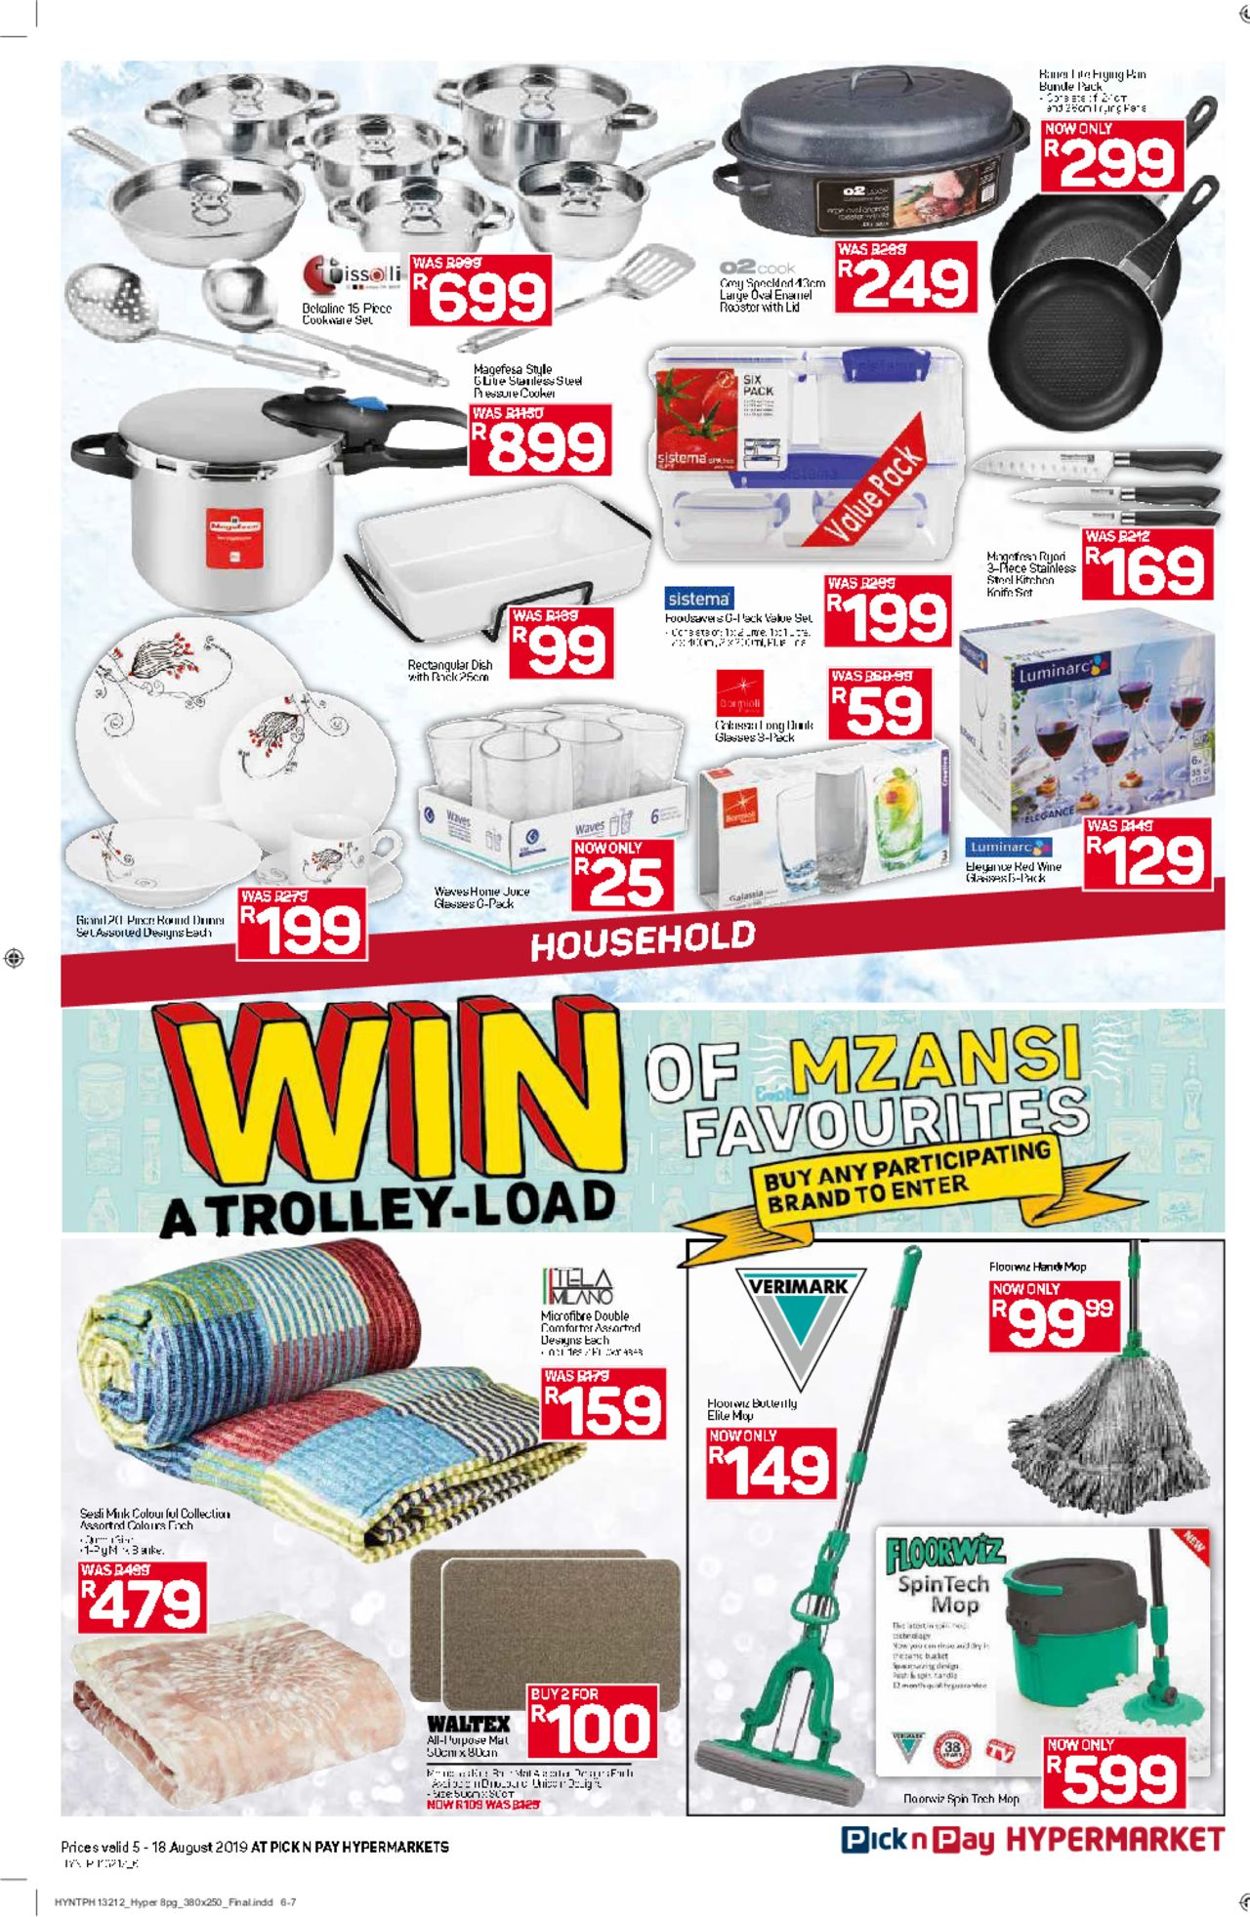 Pick n Pay Catalogue - 2019/08/05-2019/08/18 (Page 6)